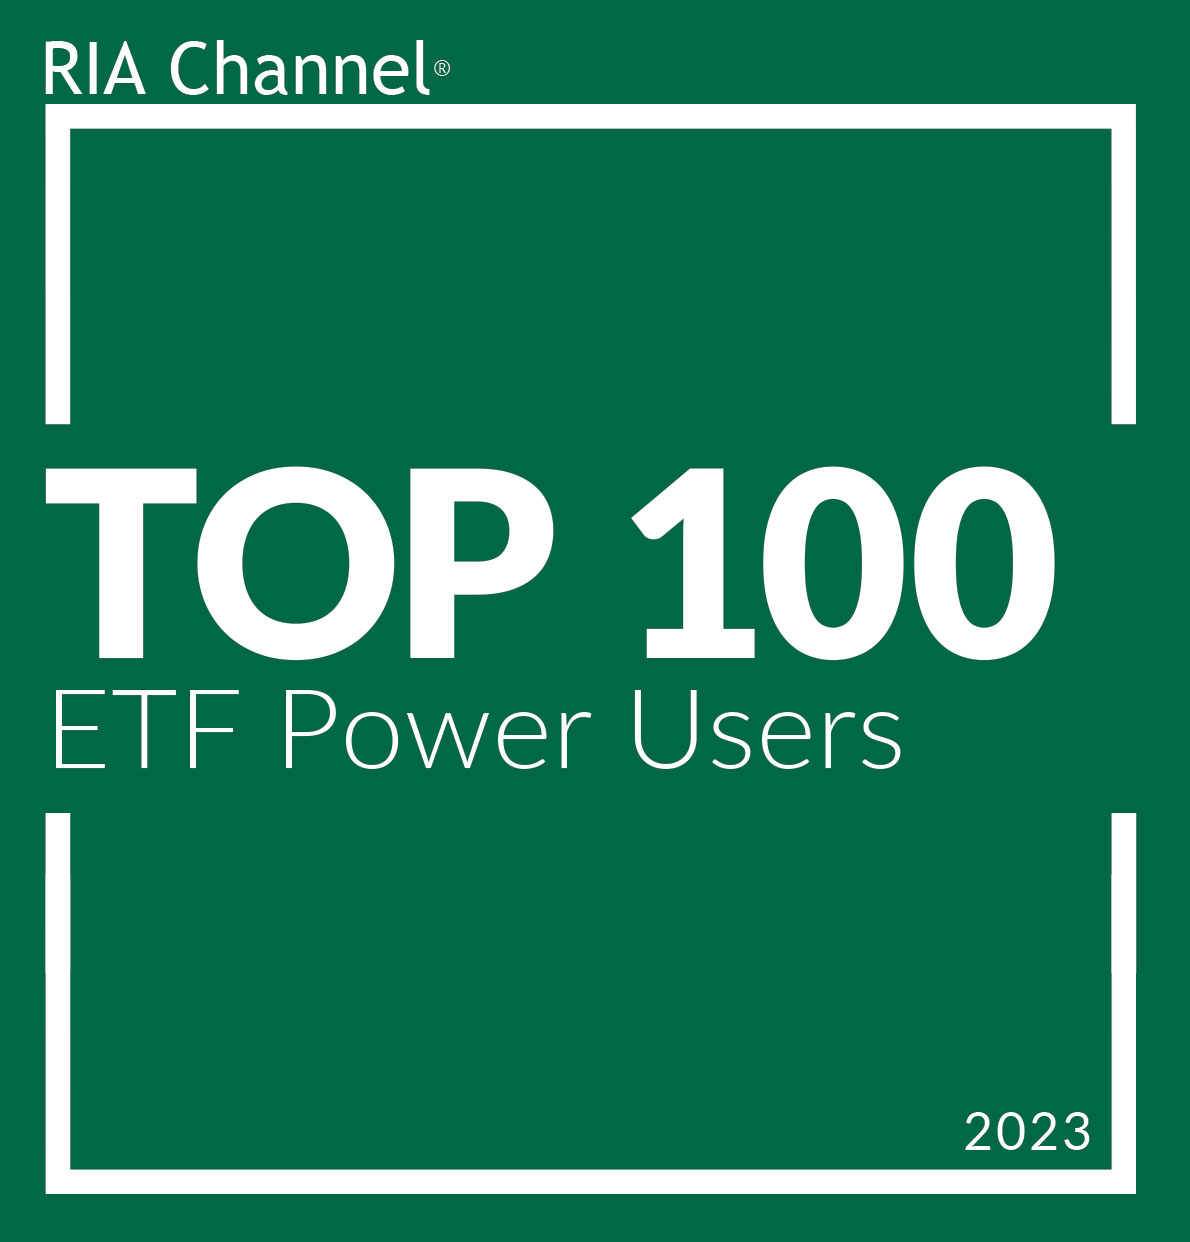 Top 100 ETF Power Users - 2023